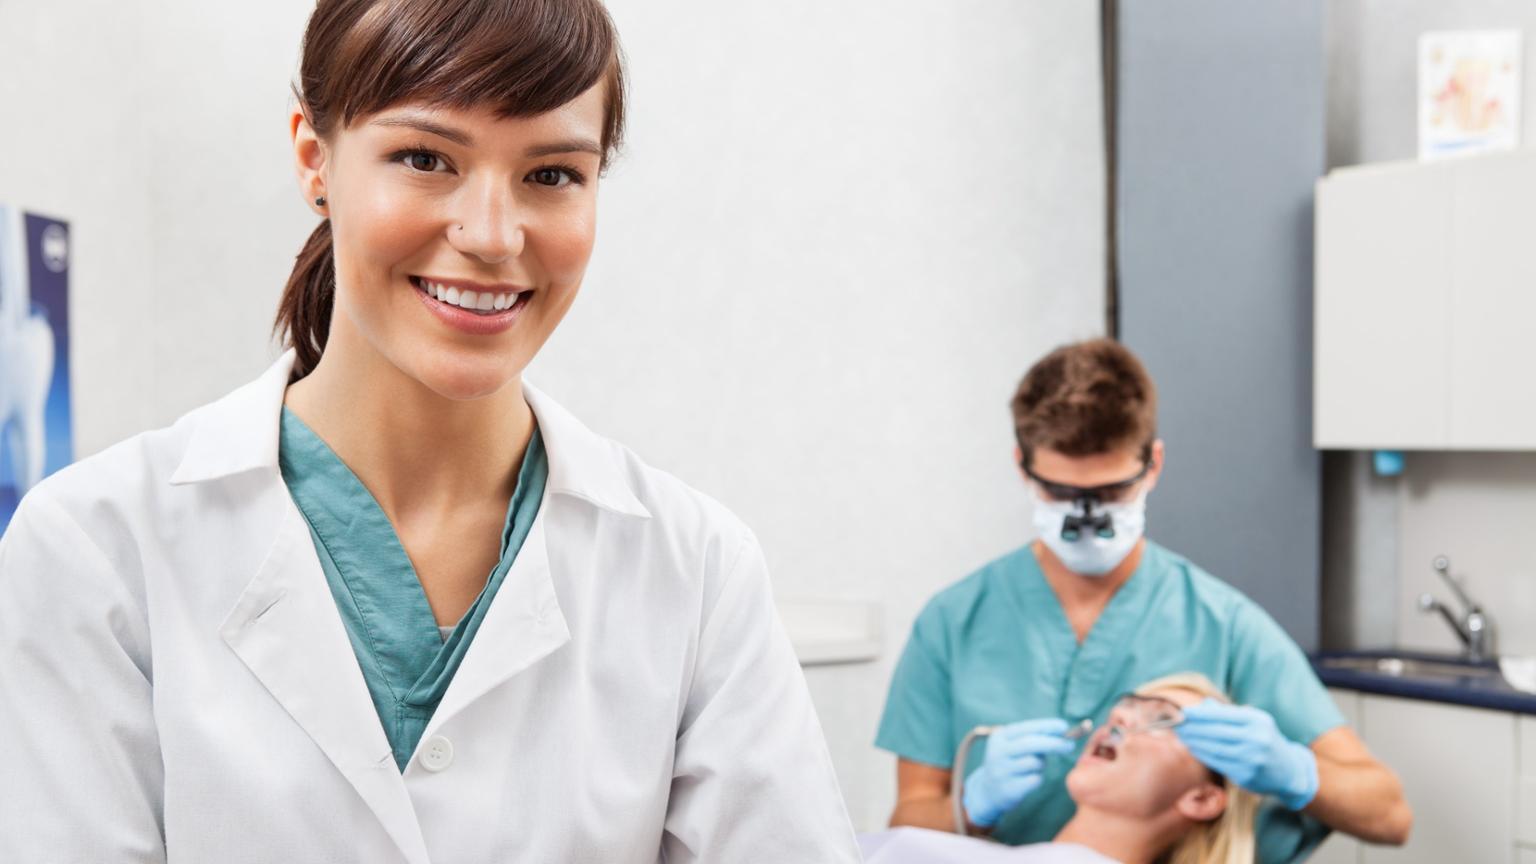 two people in the picture, one is smiling at the camera, the other is in the background wearing a pair of magnifying glasses, working intently on a patient's mouth.